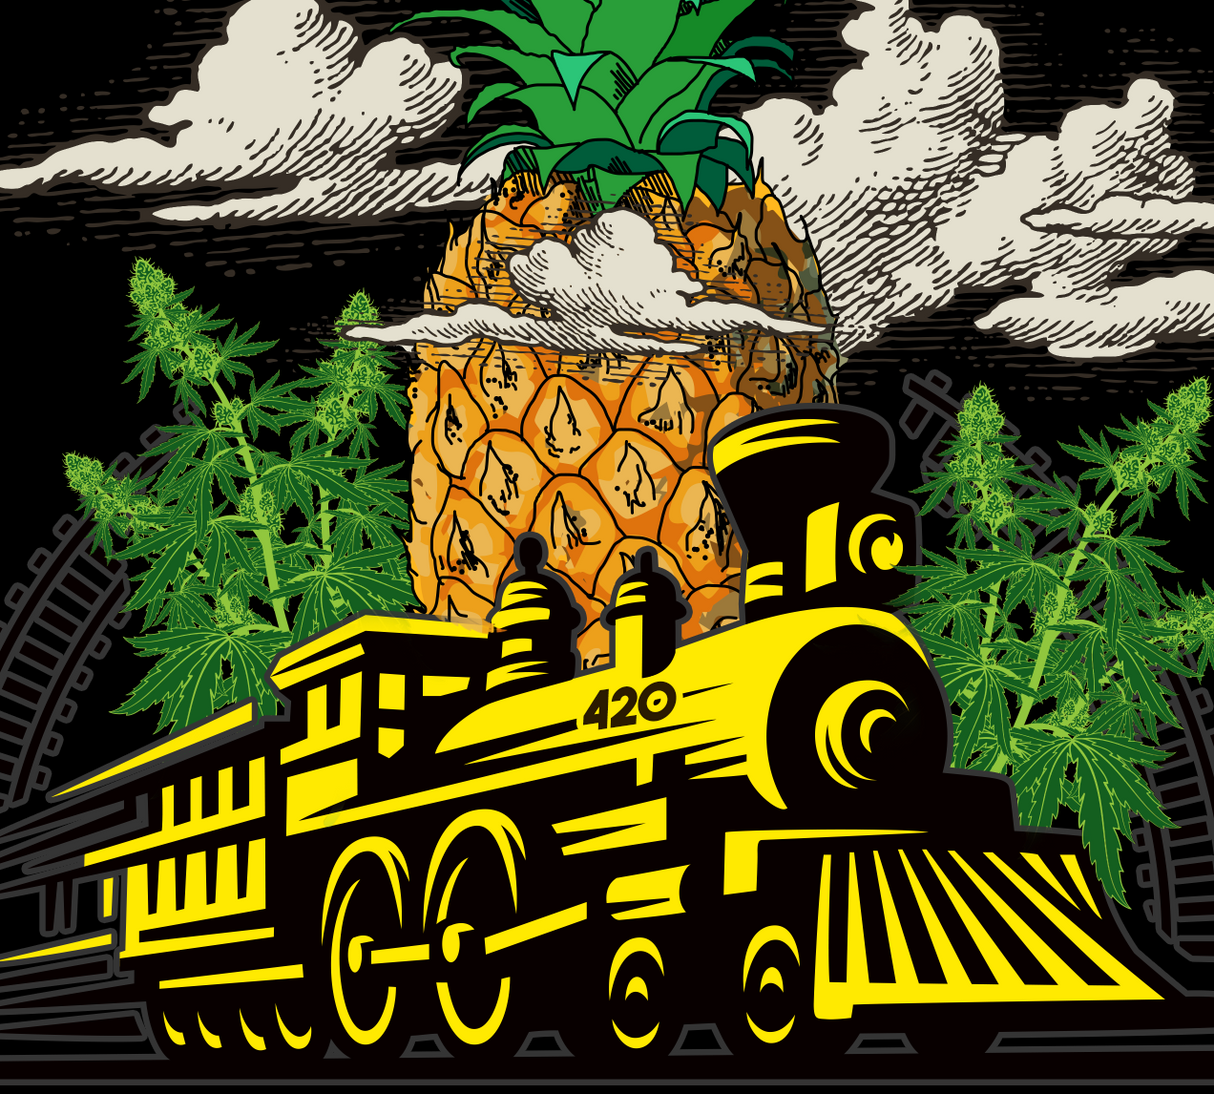 StonerDays Mens Pineapple Express Tank in Large, featuring a vibrant train and pineapple design on cotton fabric